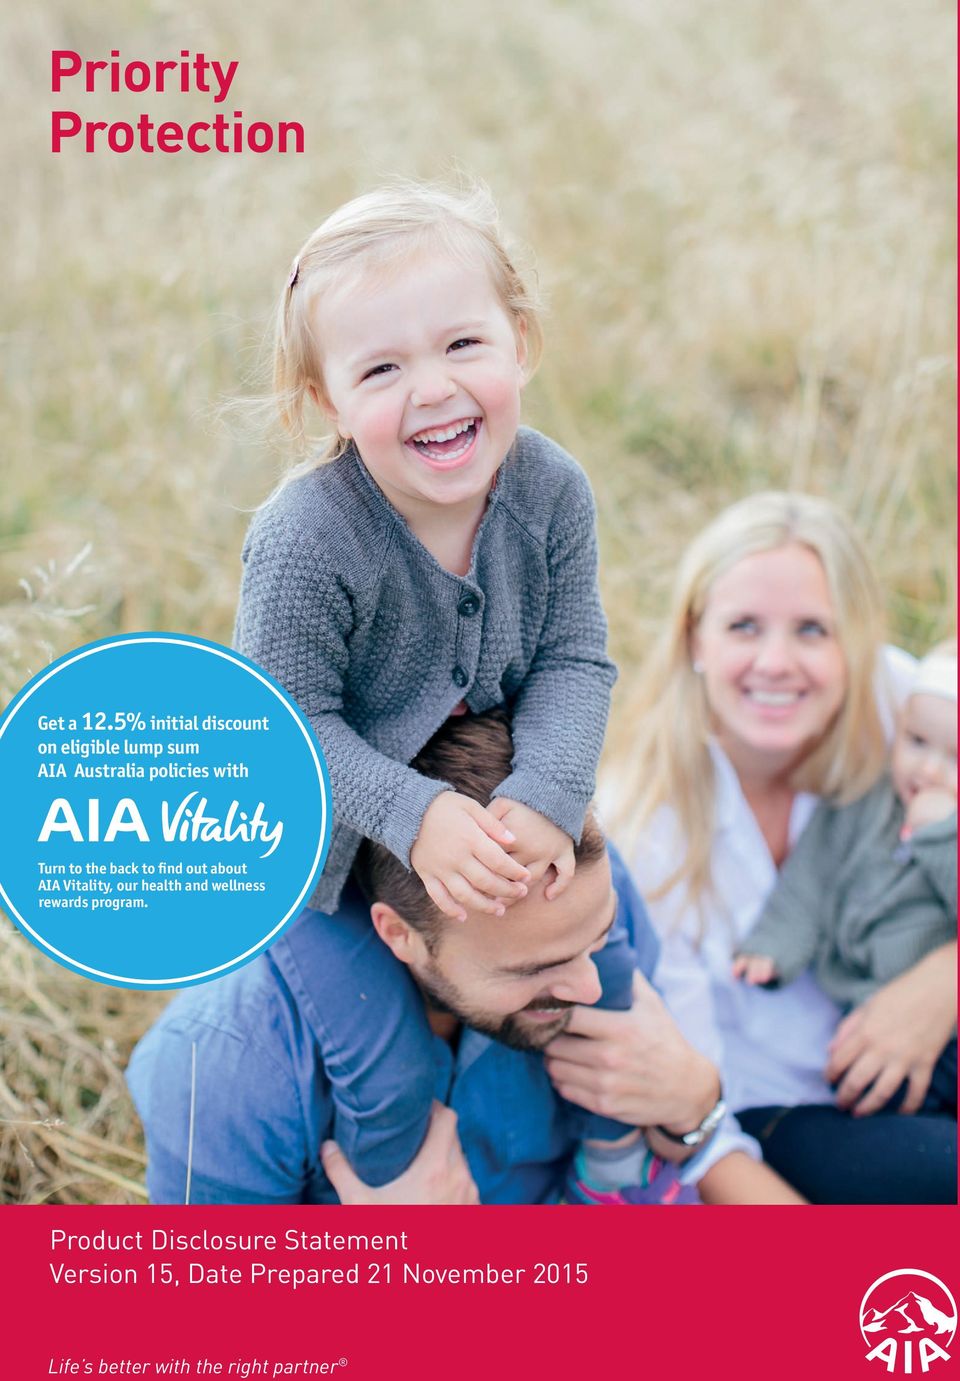 Turn to the back to find out about AIA Vitality, our health and